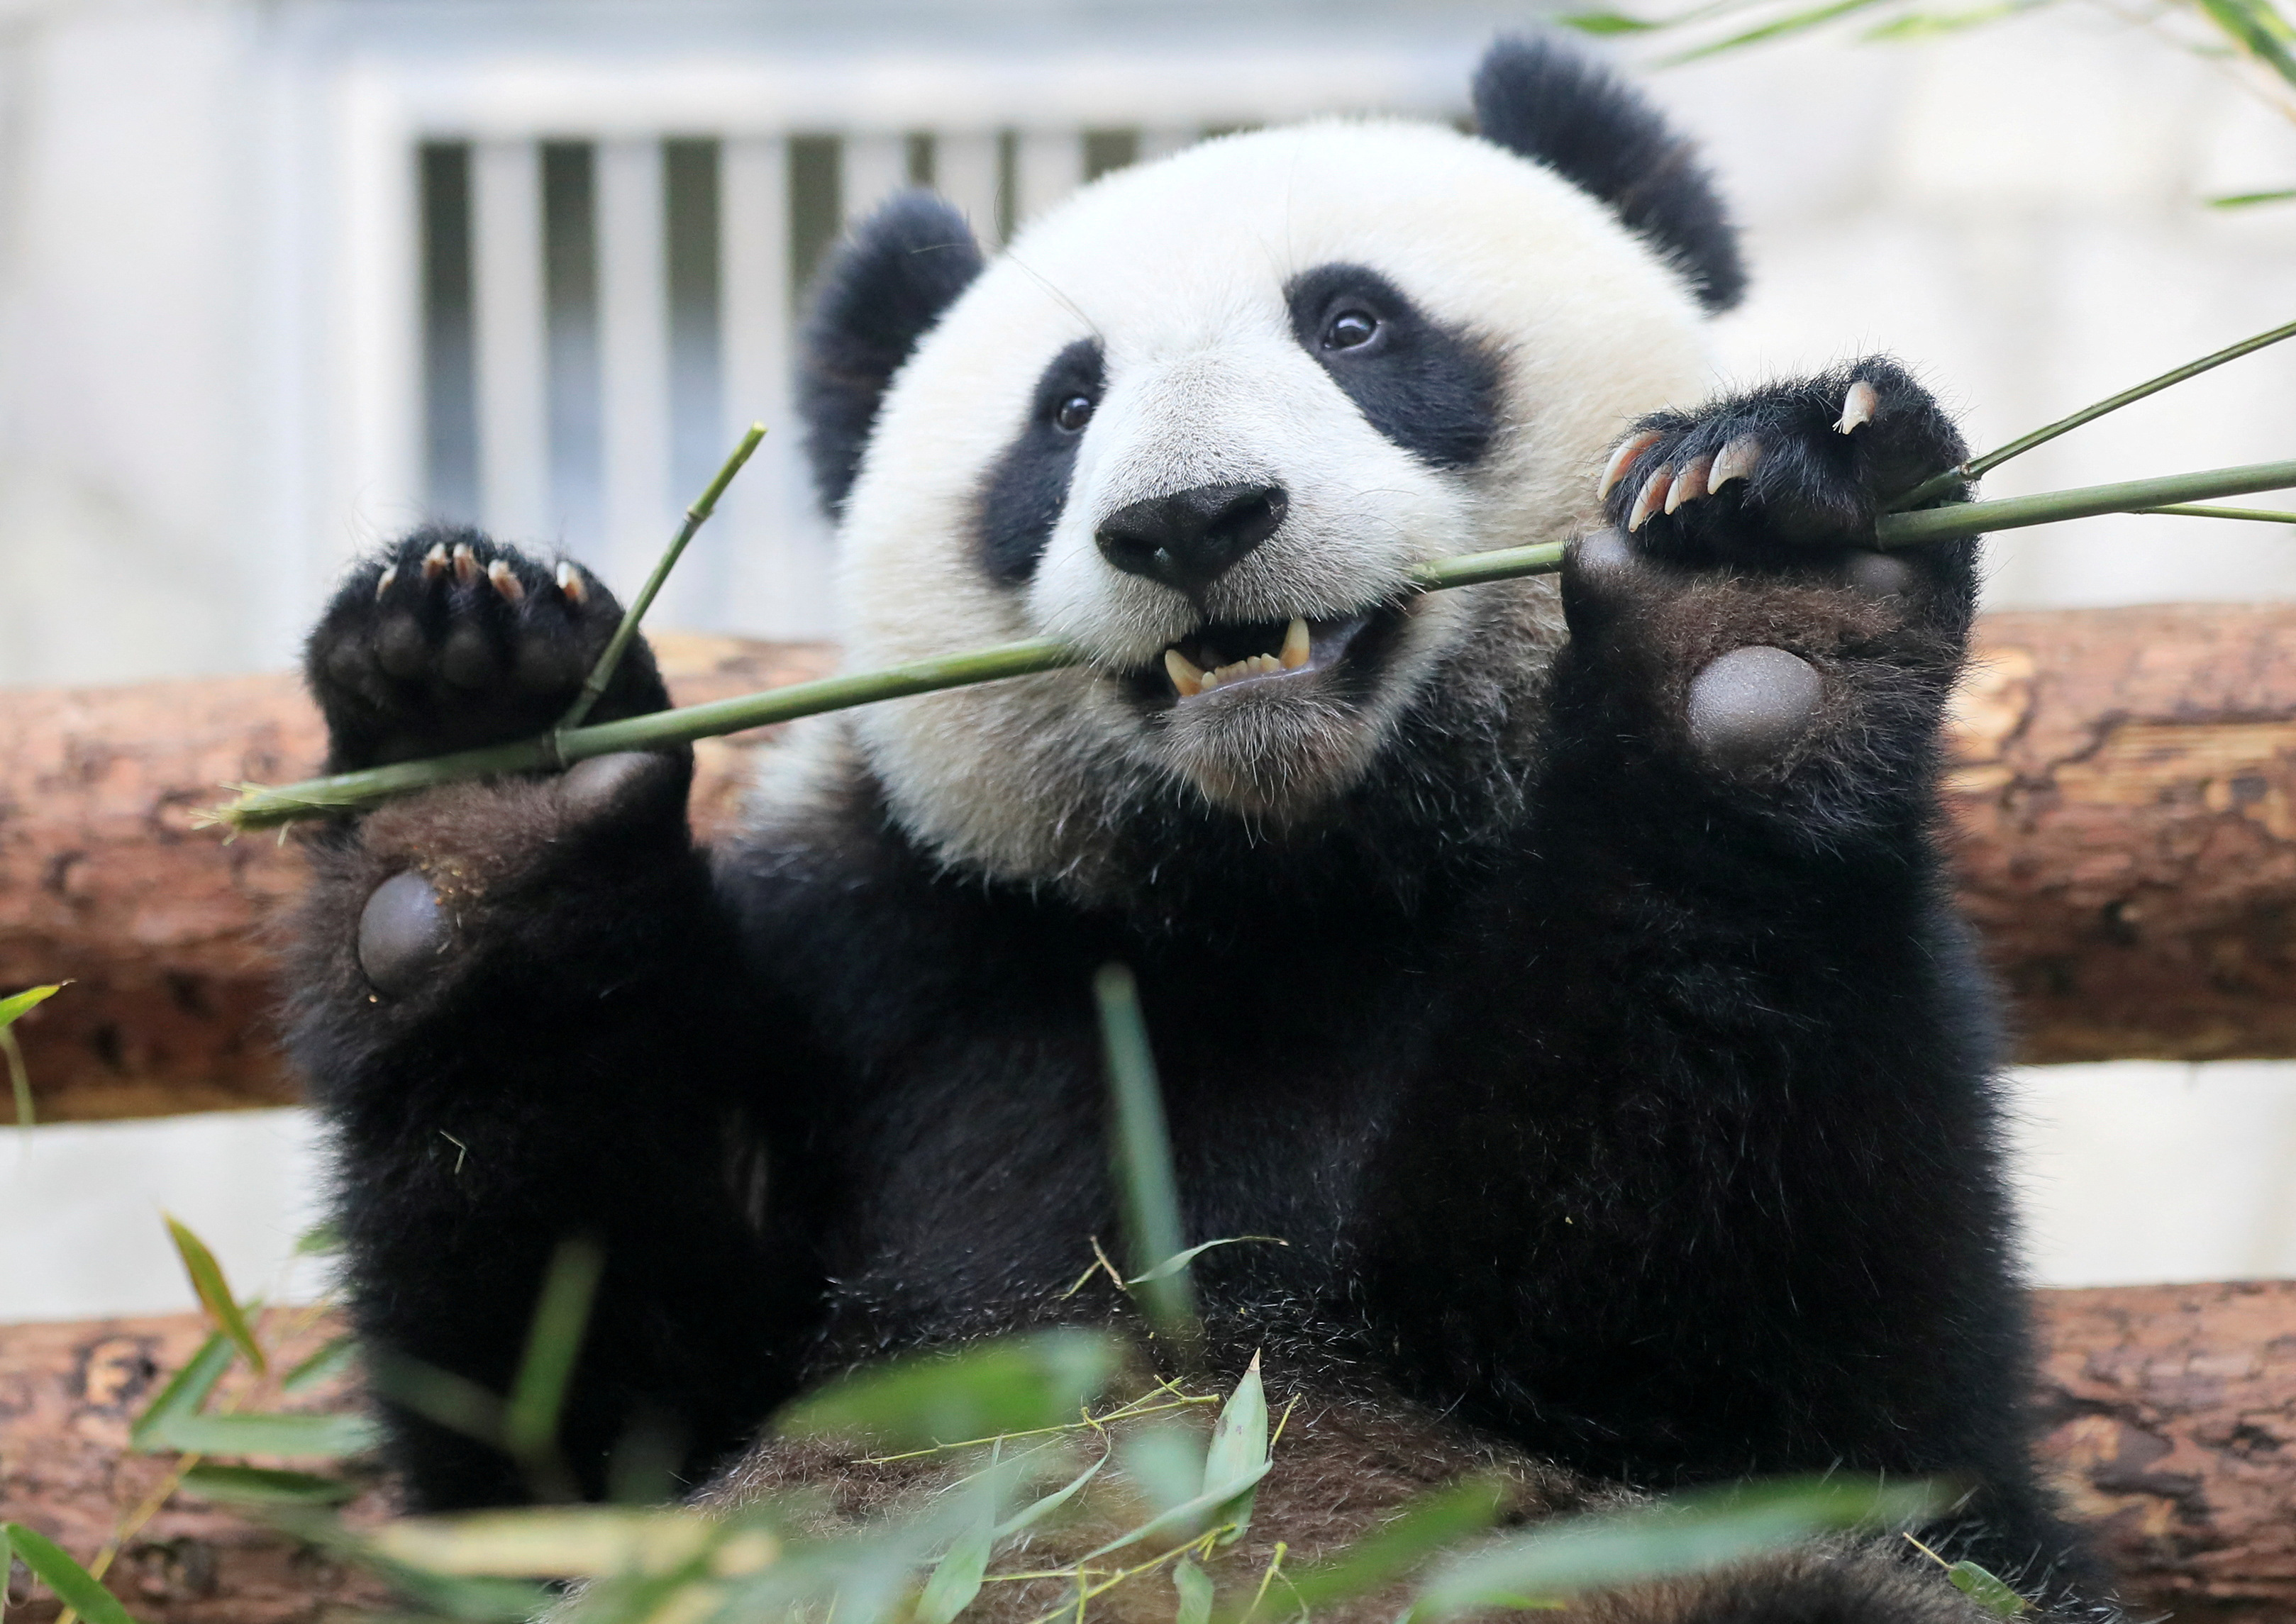 A giant panda eats bamboo at a zoo in Moscow